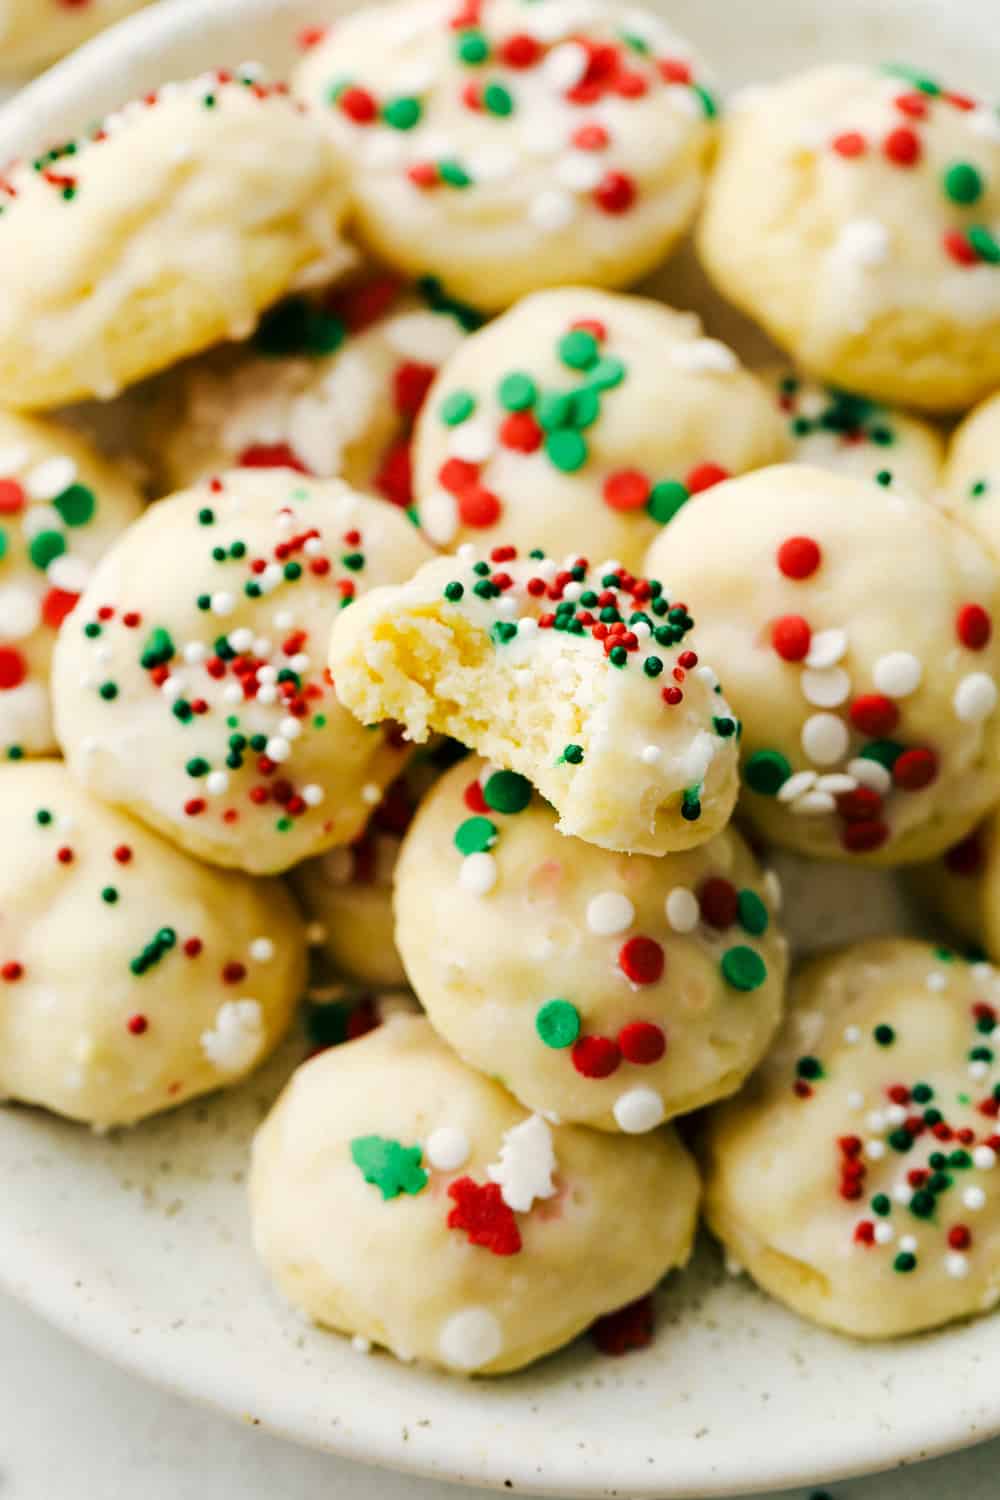 Decorated Christmas Italian Cookies on a plate.